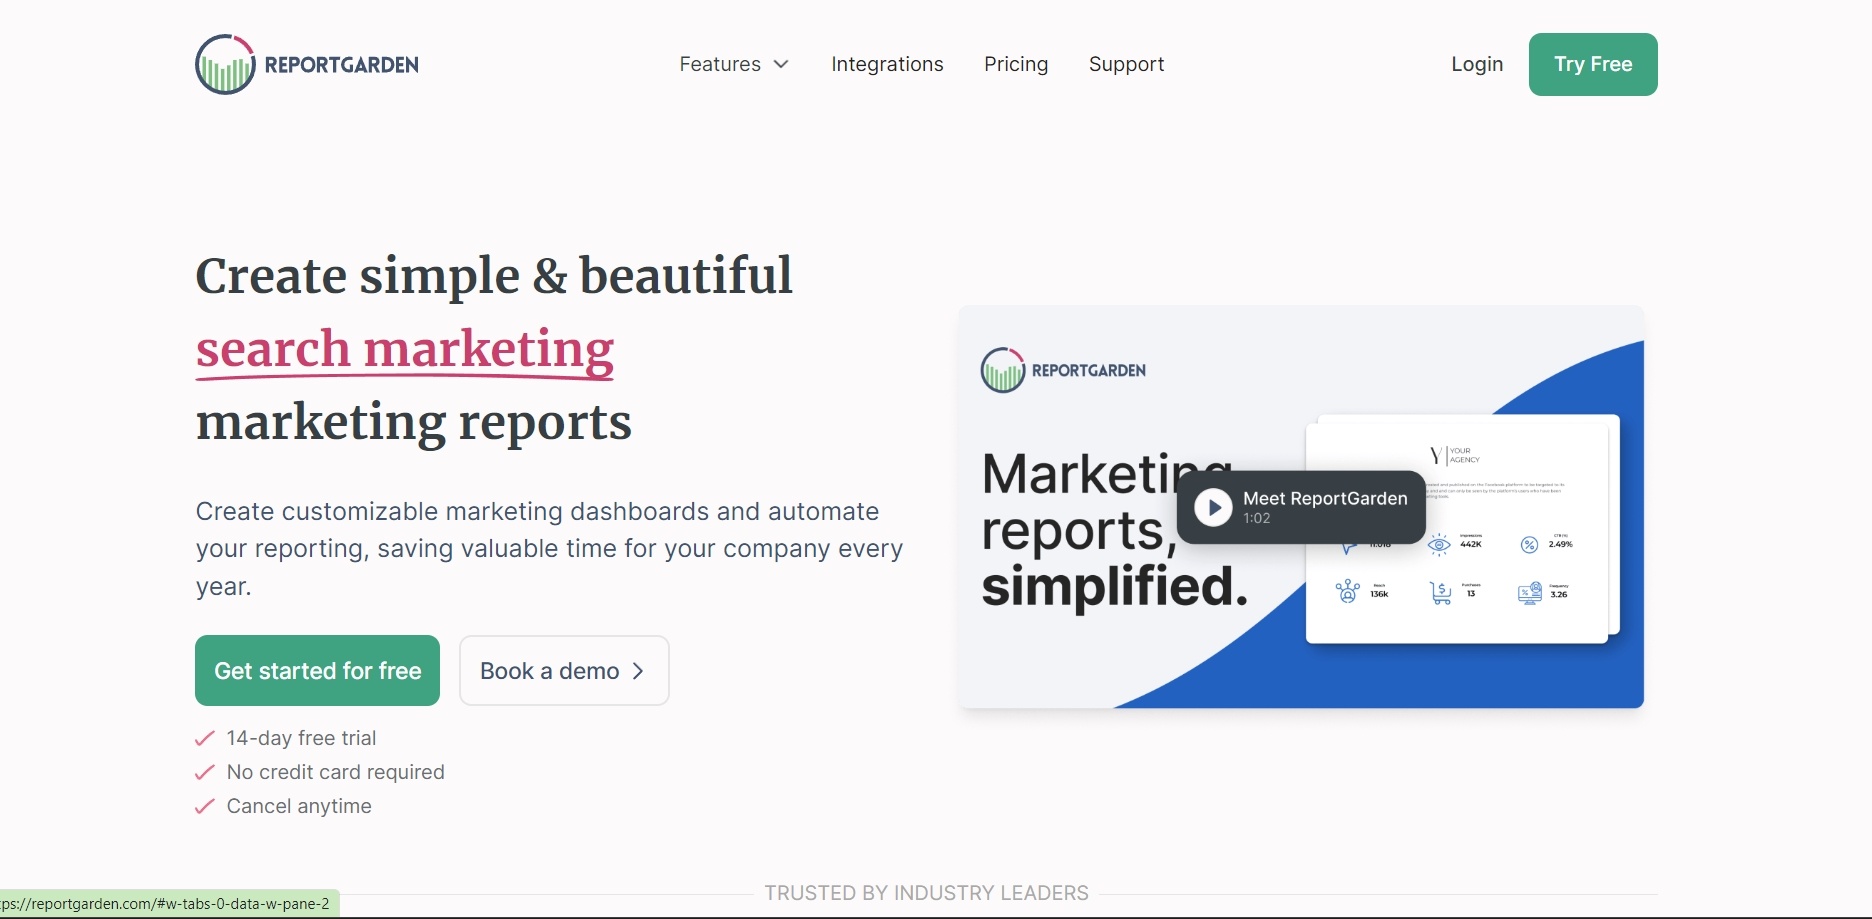 ReportGarden is a LinkedIn analytics tool that creates detailed reports for streamlined business performance